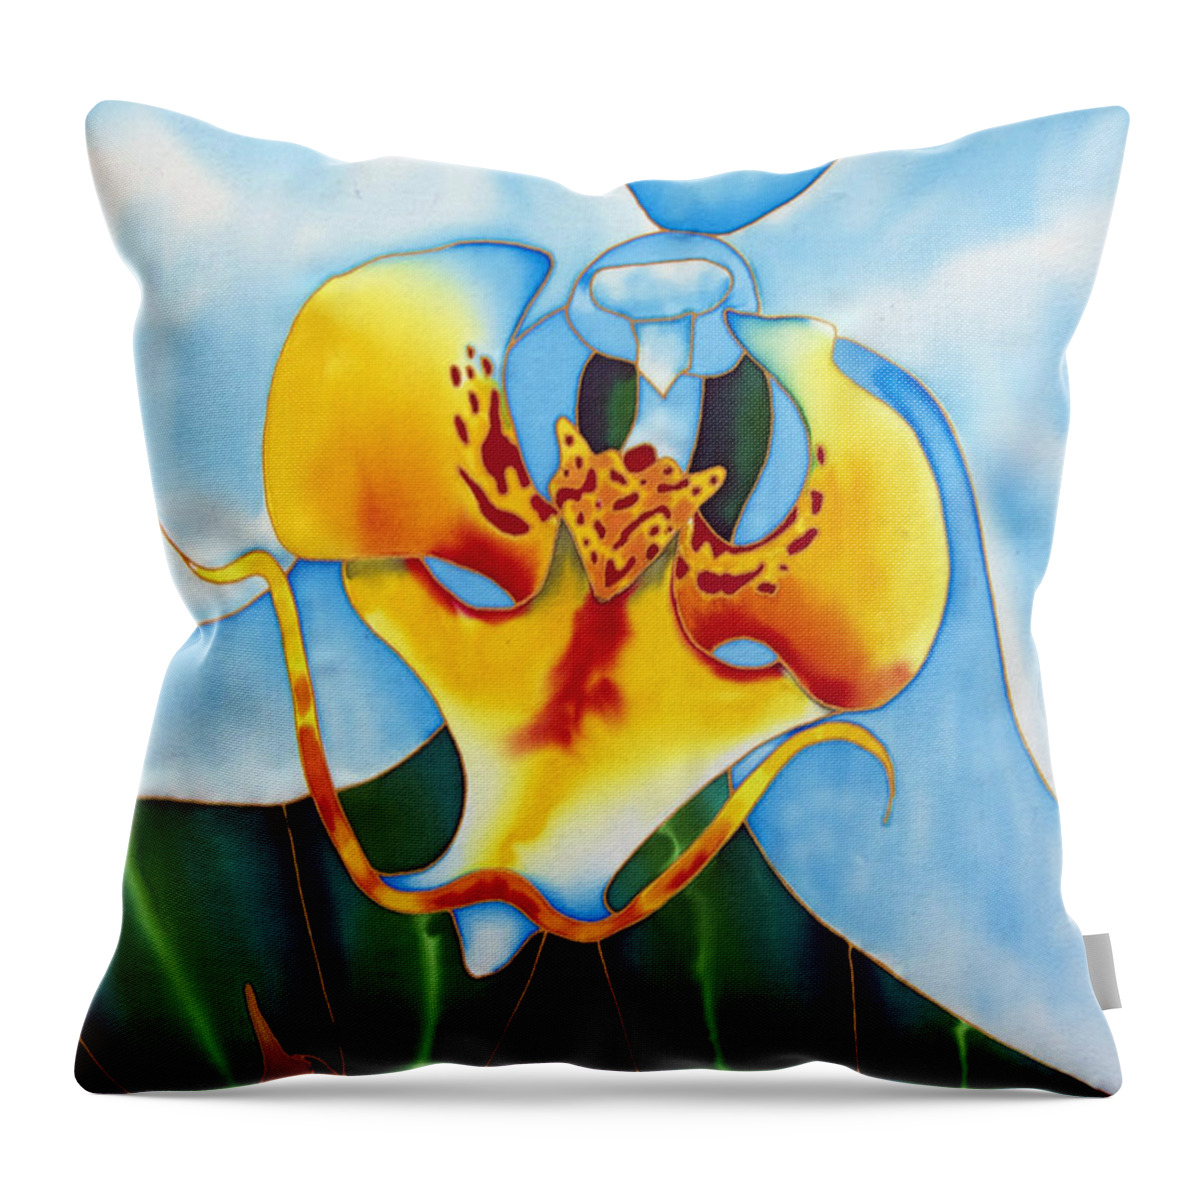 Orchid Flower Throw Pillow featuring the painting Bonnie Orchid I by Daniel Jean-Baptiste